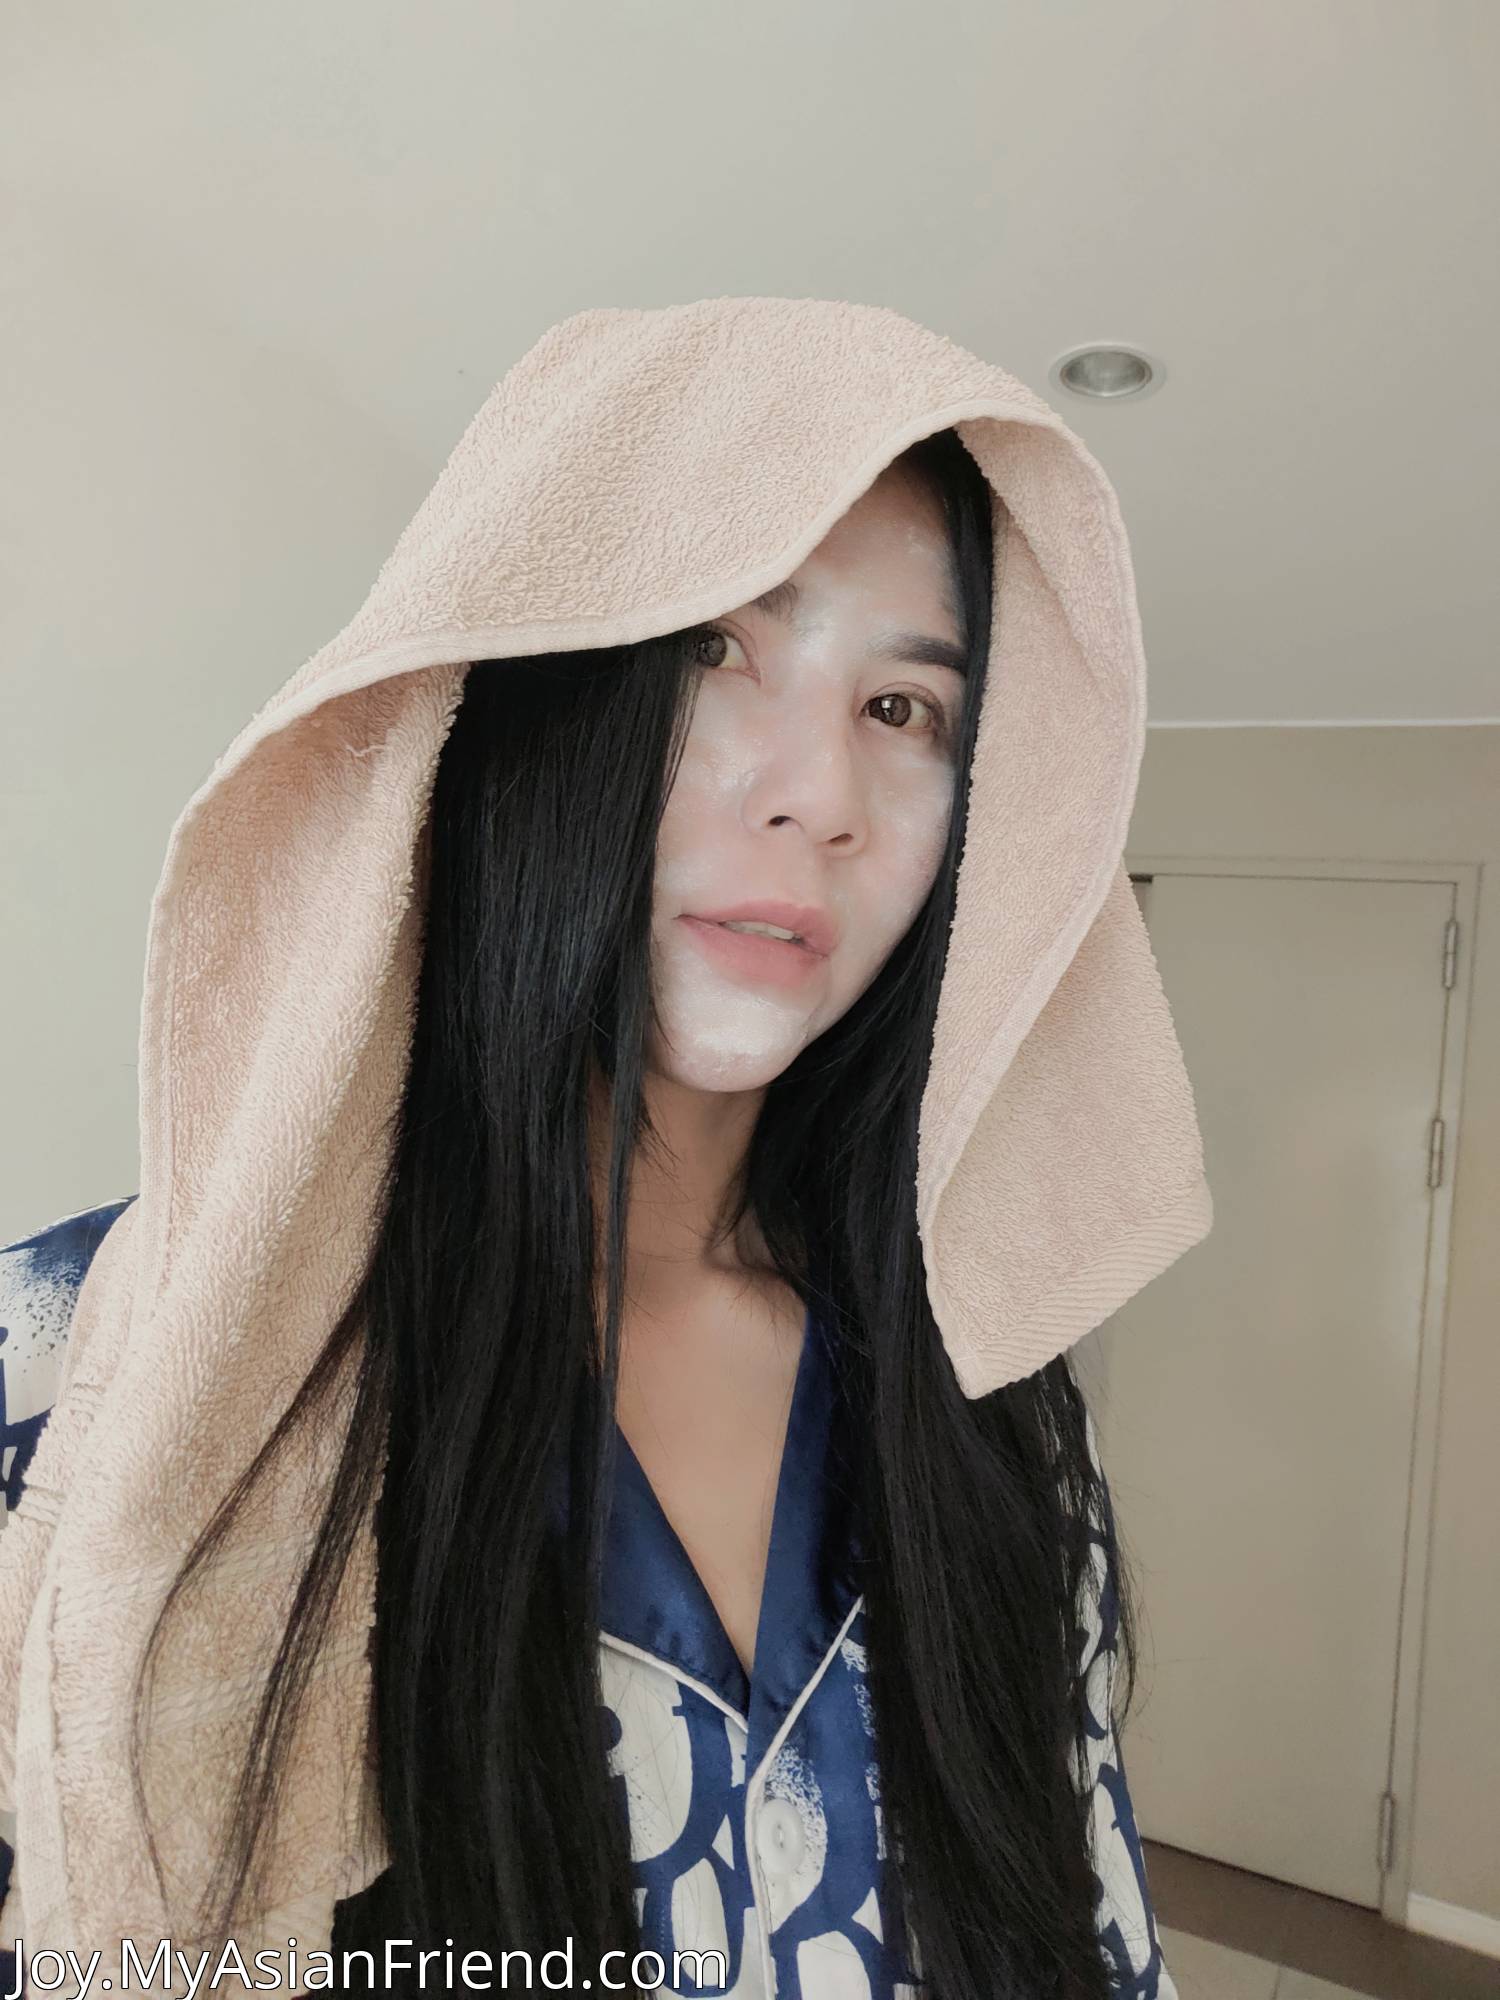 Joy's personal blog photo 1 added Monday the 5th of September 2022